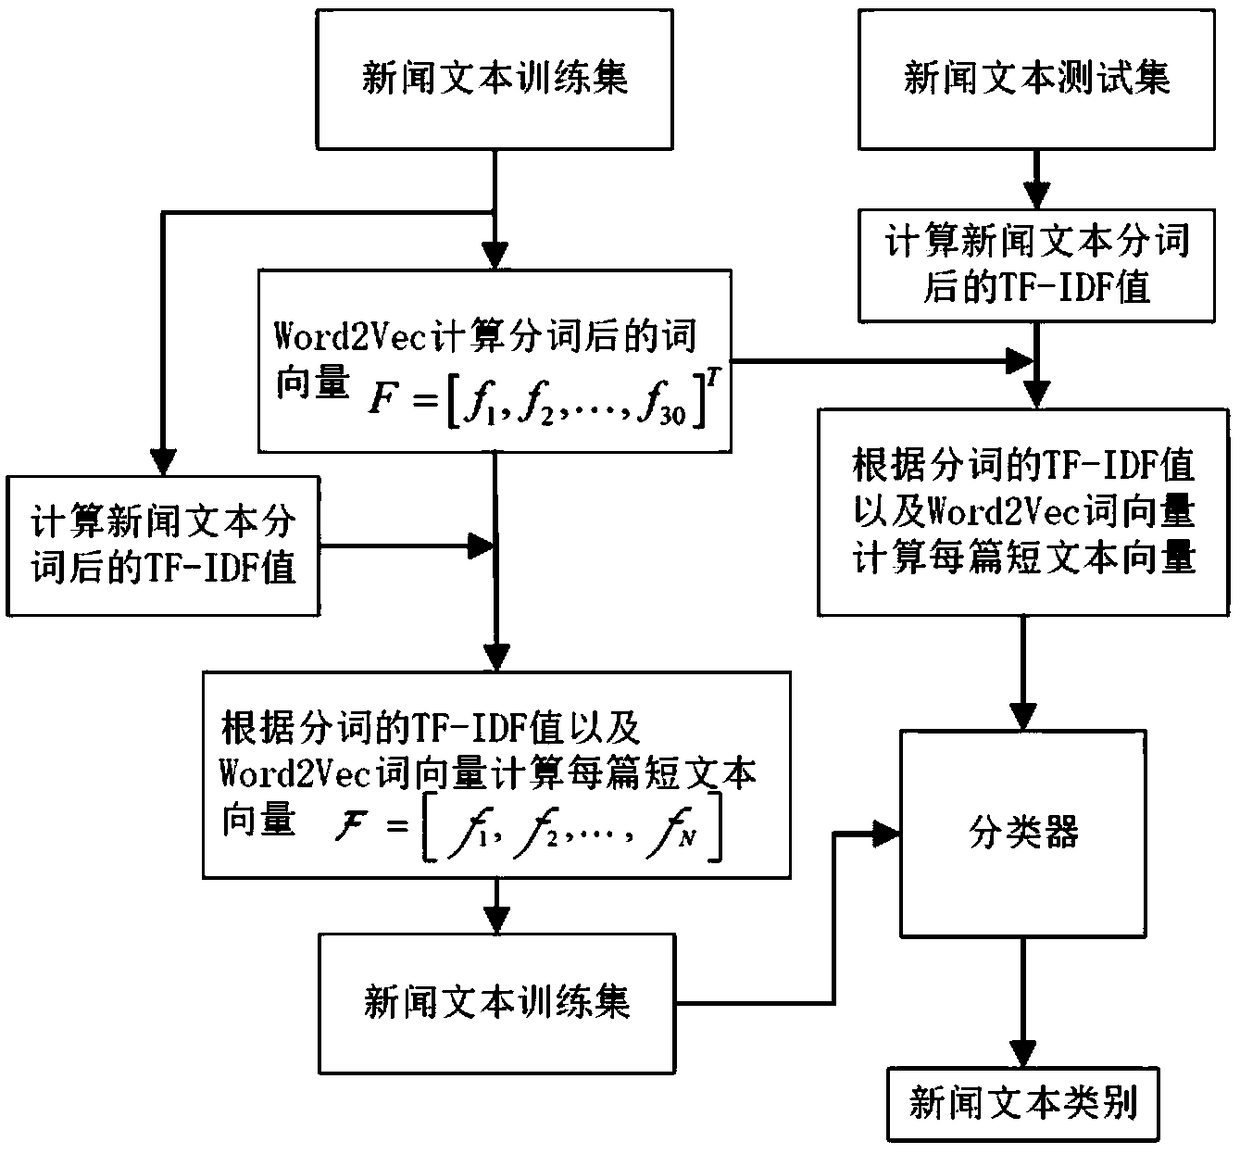 A text classification and extraction method for Chinese news emergencies